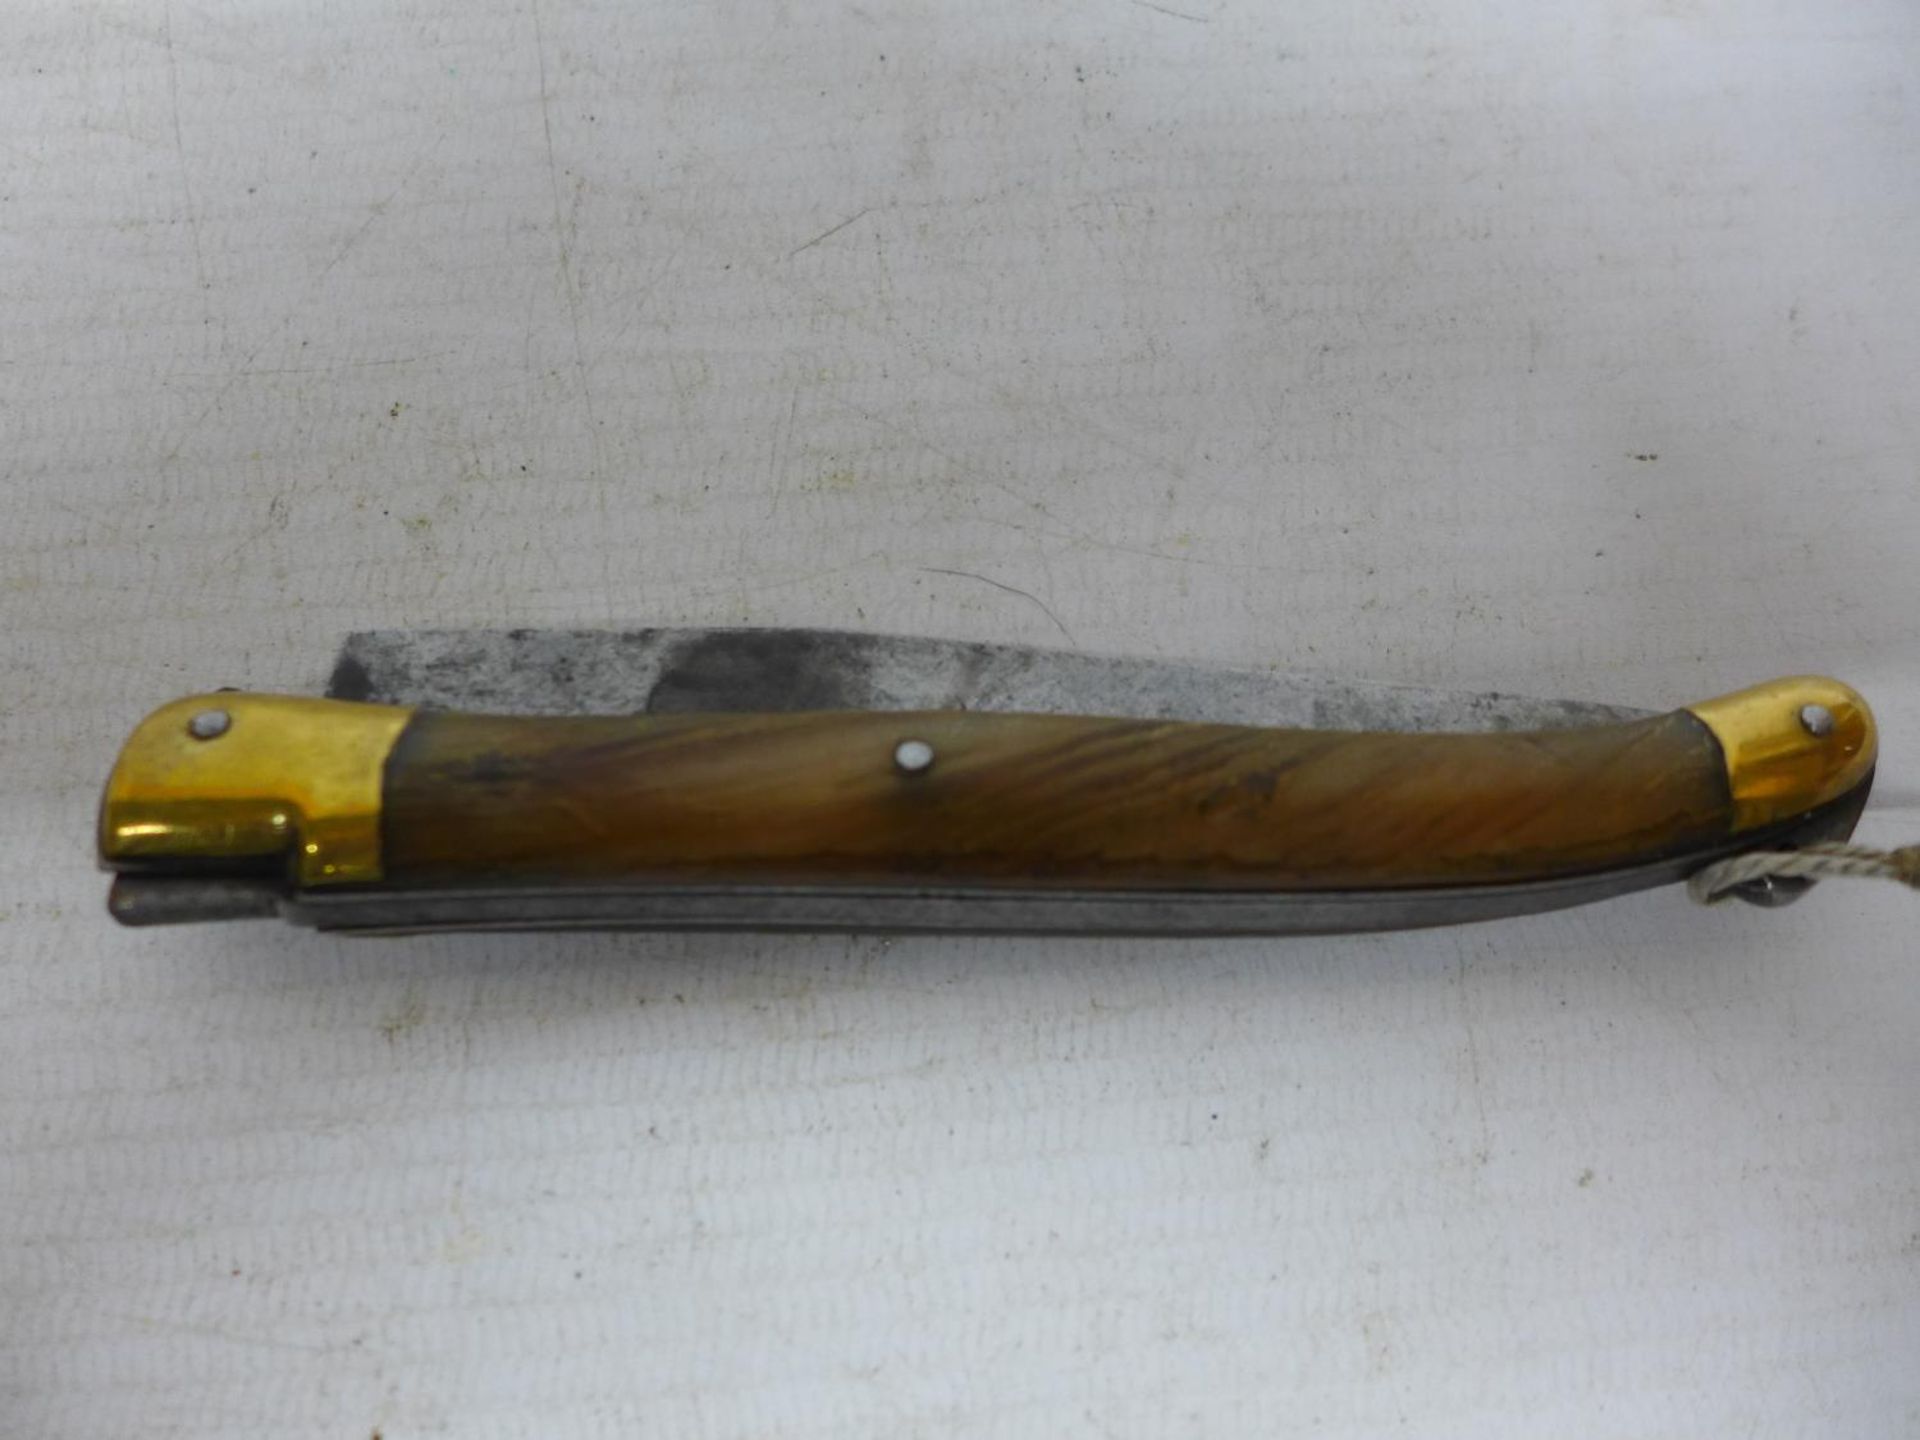 A LAGUIOLE ROSSIGNOL POCKET KNIFE CIRCA 1880 WITH GOLD INLAY - Image 2 of 3